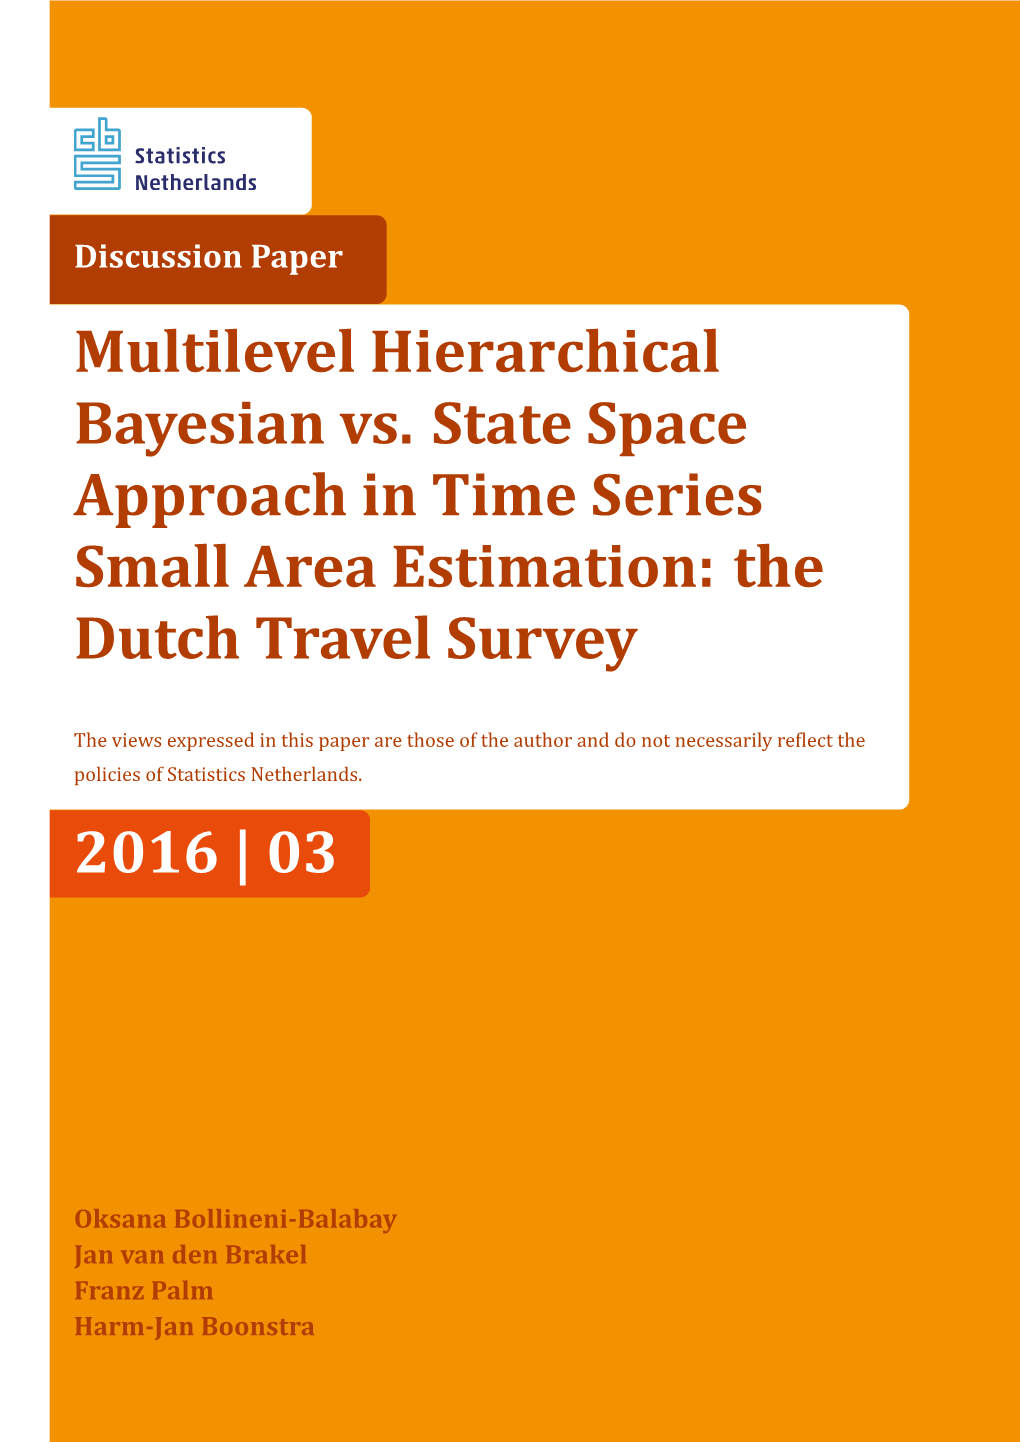 Multilevel Hierarchical Bayesian Vs. State Space Approach in Time Series Small Area Estimation: the Dutch Travel Survey